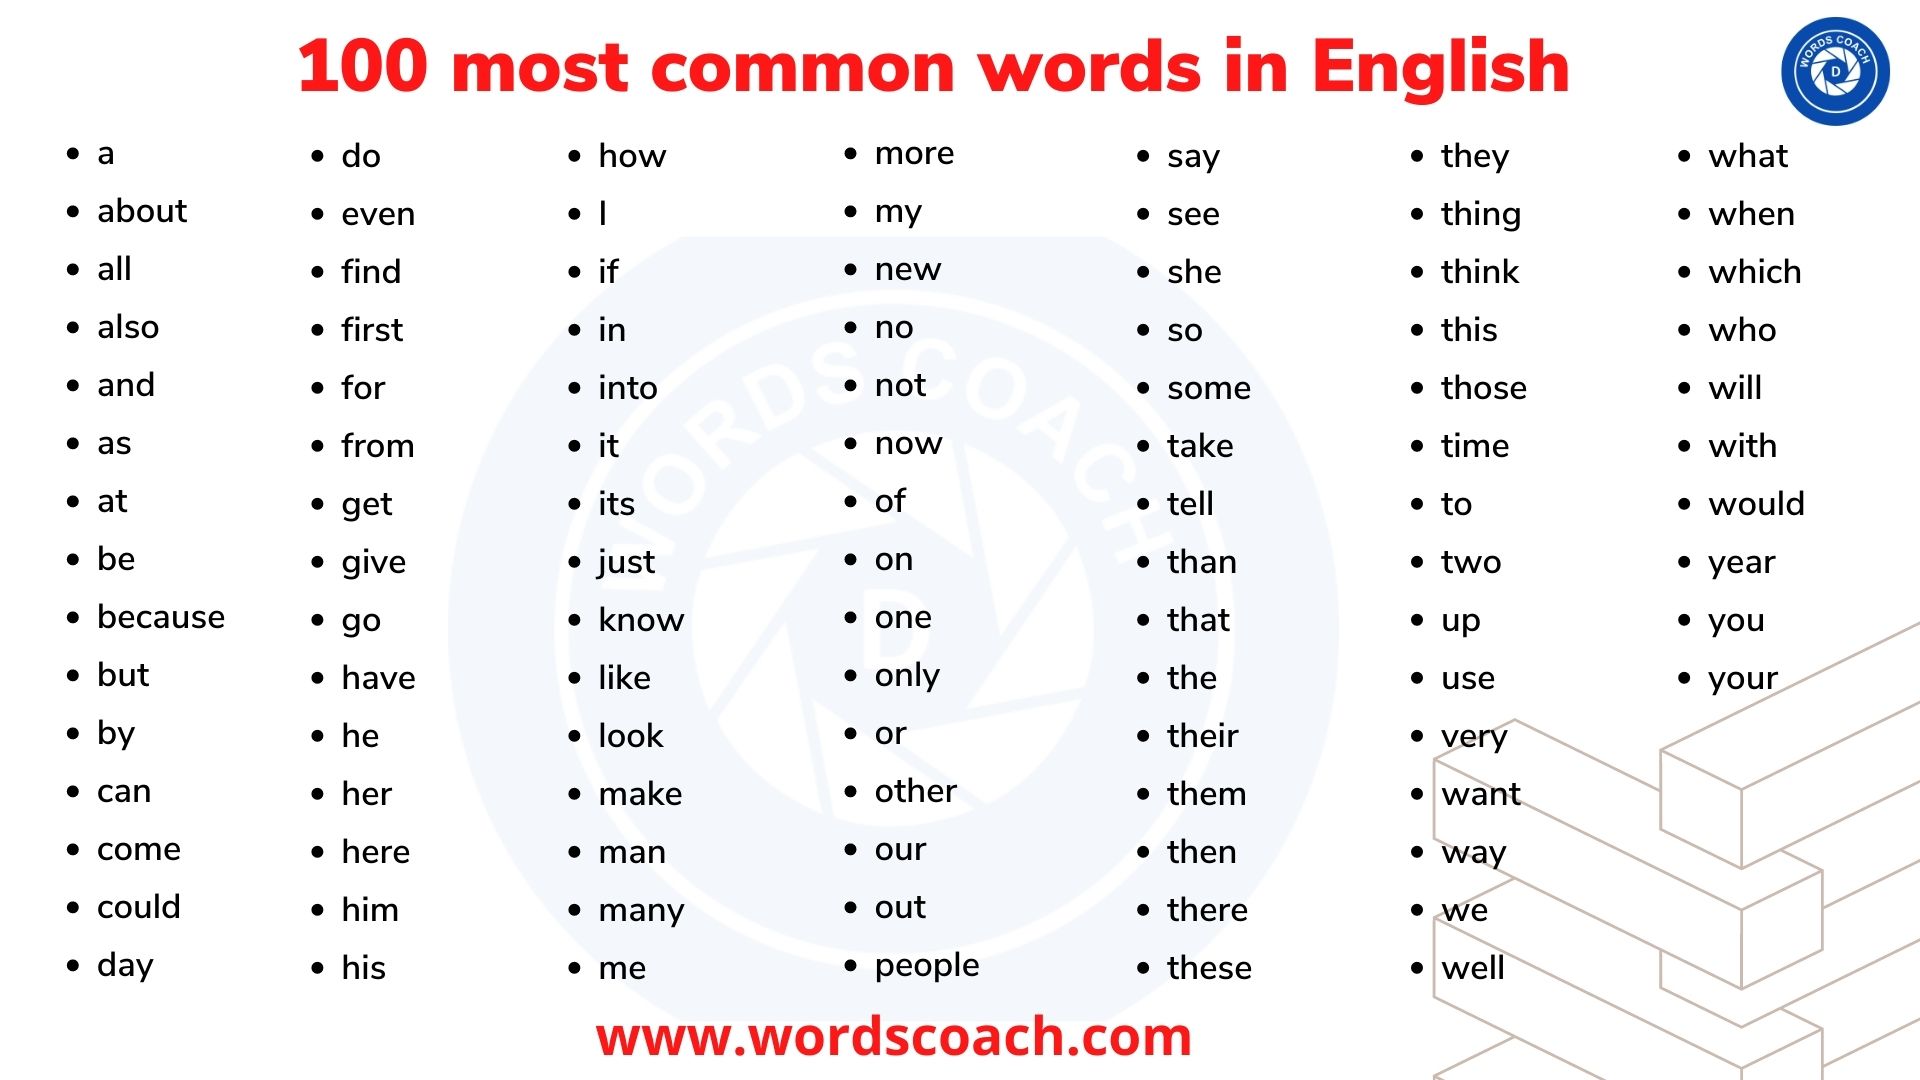 100 most common words in English - wordscoach.com